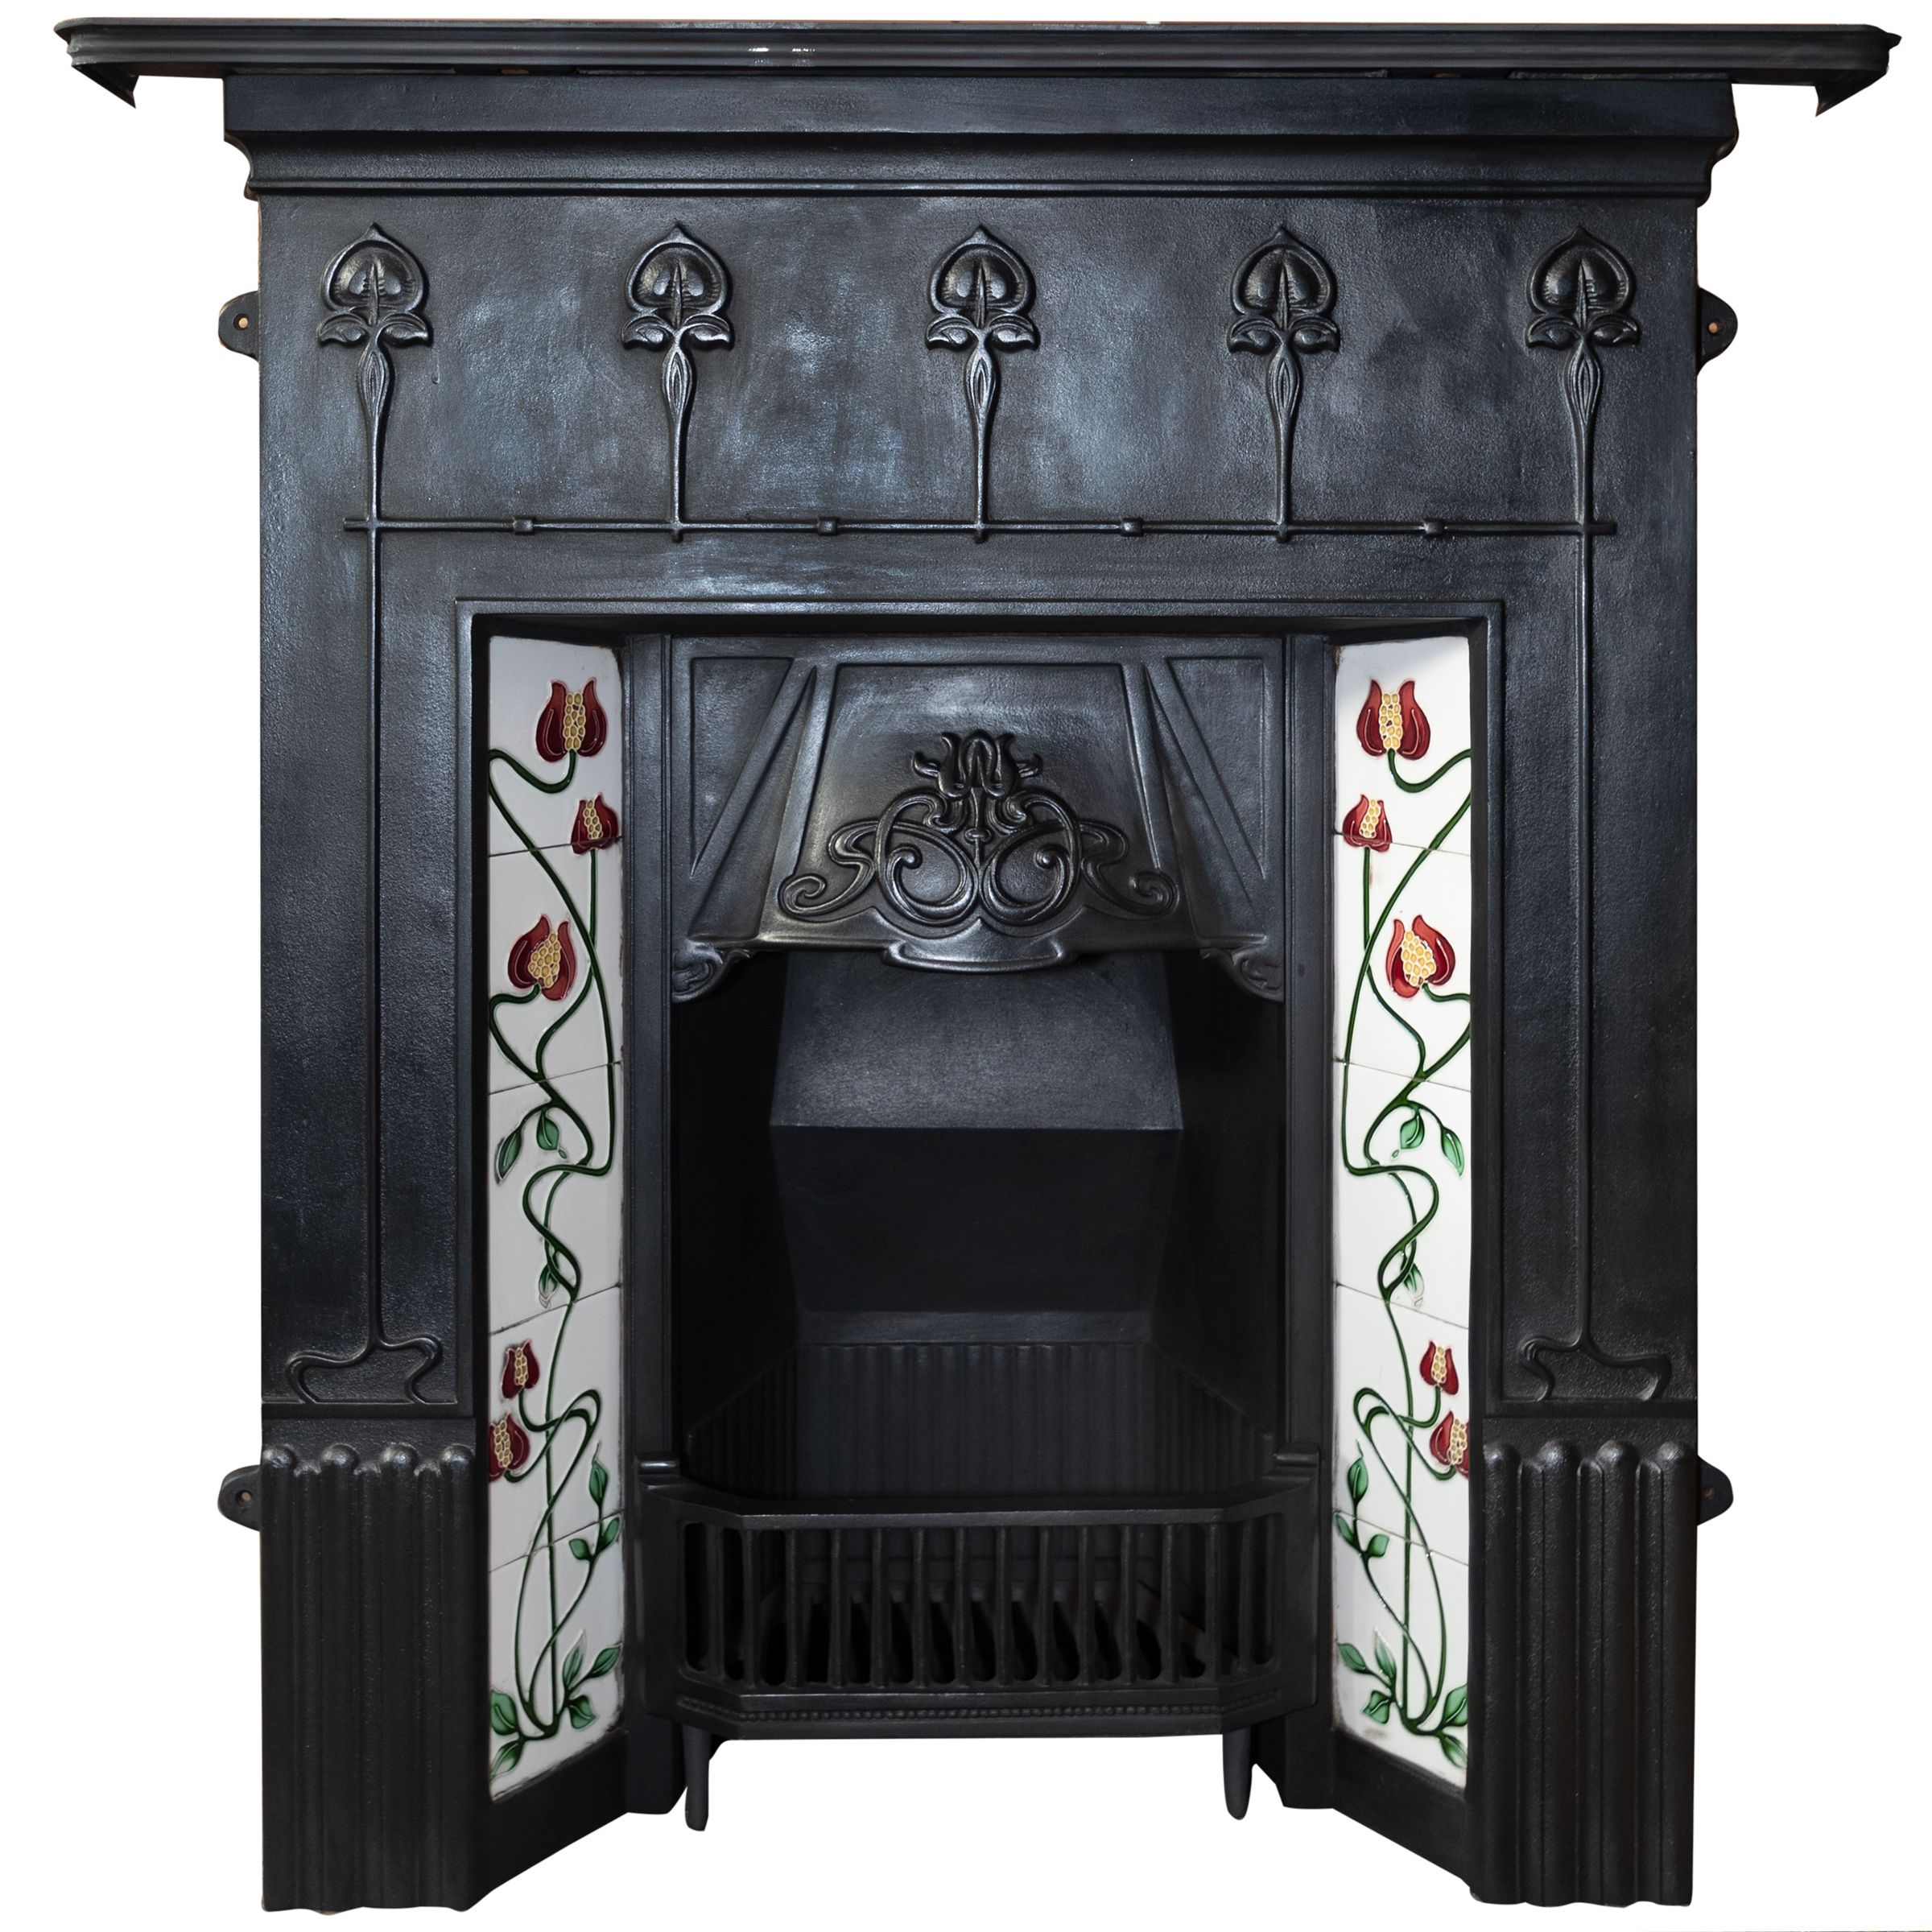 Cast Fireplaces Luxury Huge Selection Of Antique Cast Iron Fireplaces Fully